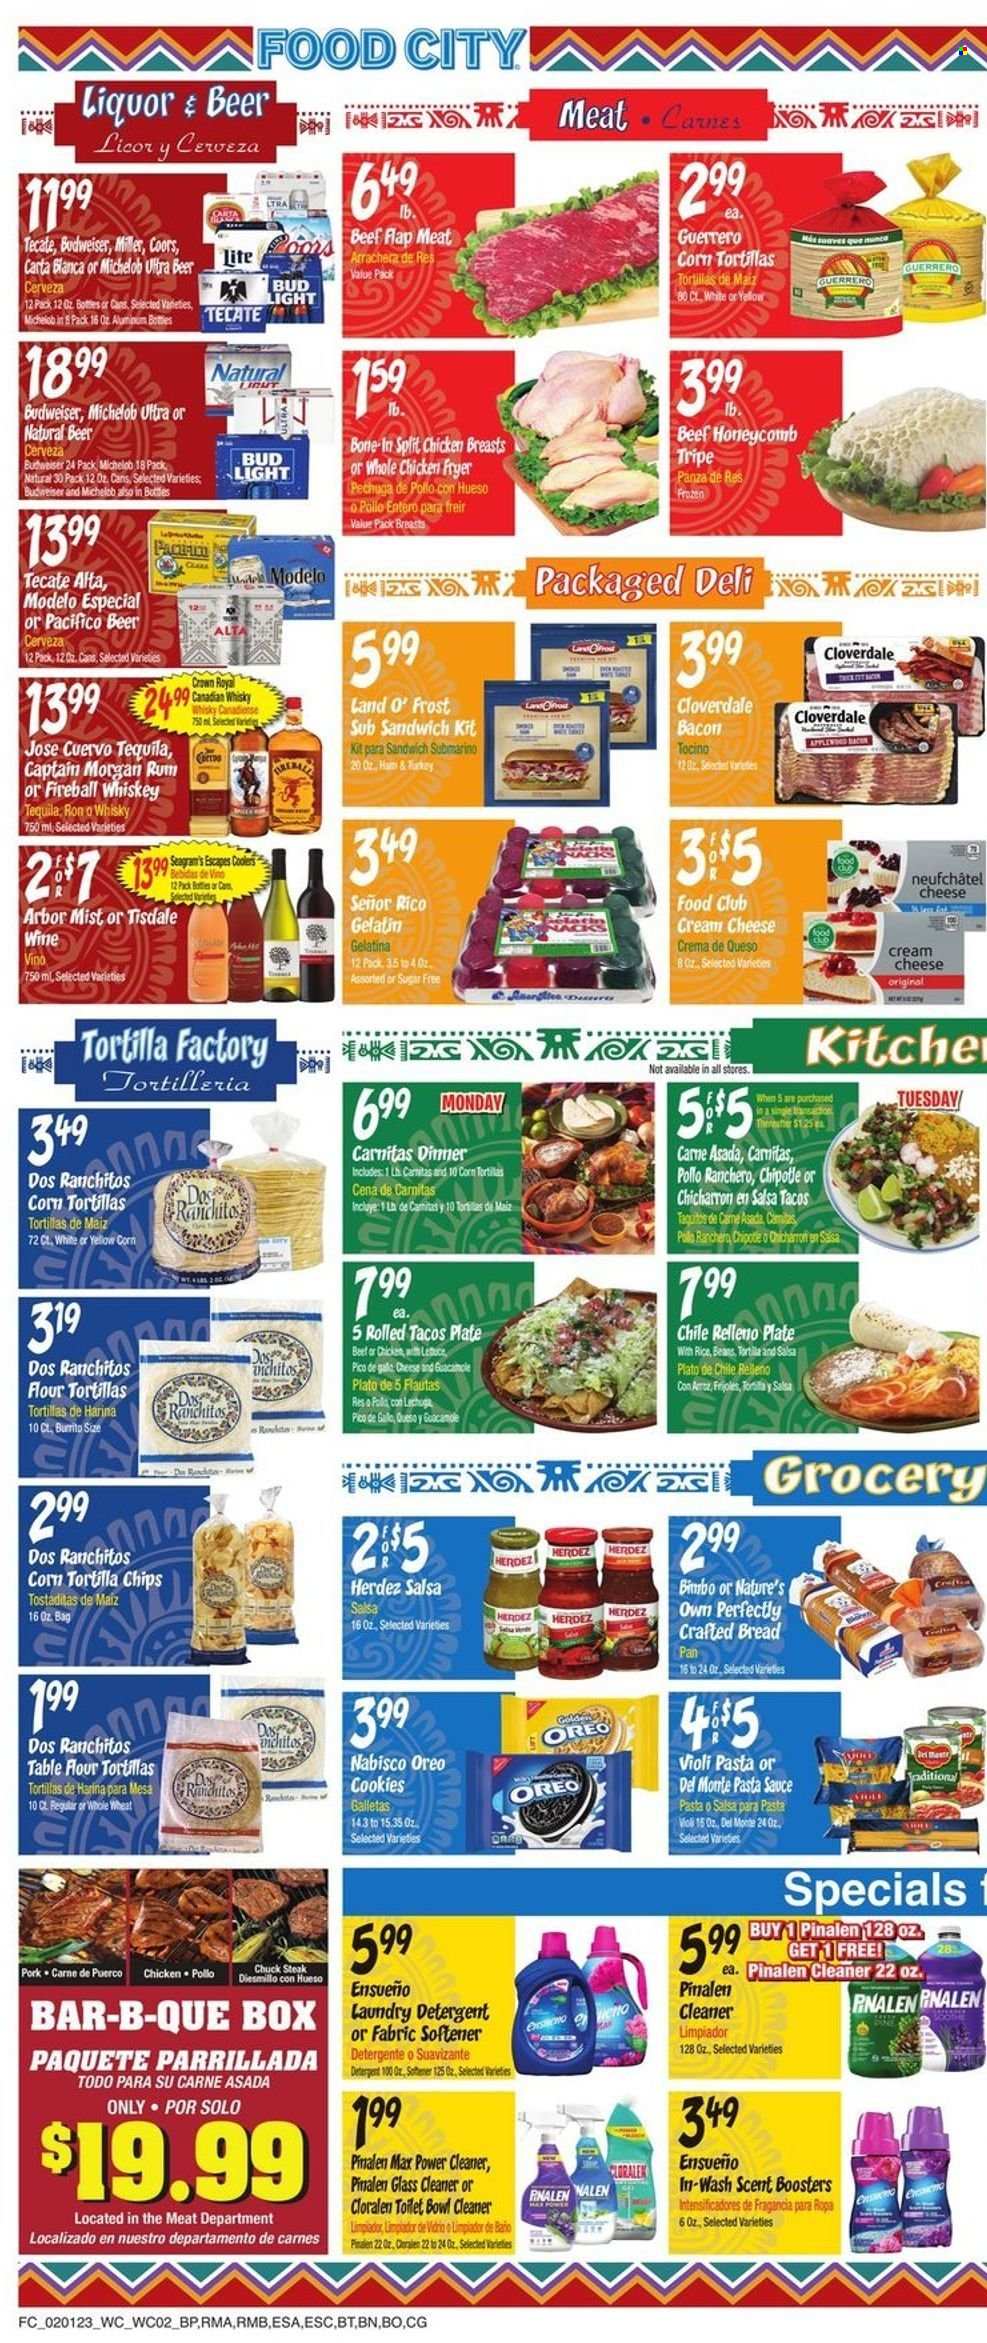 thumbnail - Food City Flyer - 02/01/2023 - 02/07/2023 - Sales products - bread, corn tortillas, tacos, flour tortillas, pasta sauce, sandwich, sauce, burrito, taquitos, bacon, ham, guacamole, cream cheese, Neufchâtel, cheese, Oreo, cookies, tortilla chips, chips, Del Monte, salsa, canadian whisky, Captain Morgan, rum, tequila, whiskey, liquor, Ron Pelicano, whisky, beer, Bud Light, Miller, Modelo, whole chicken, chicken breasts, beef meat, steak, chuck steak, gelatin, Nature's Own, Budweiser, Coors, Michelob. Page 2.